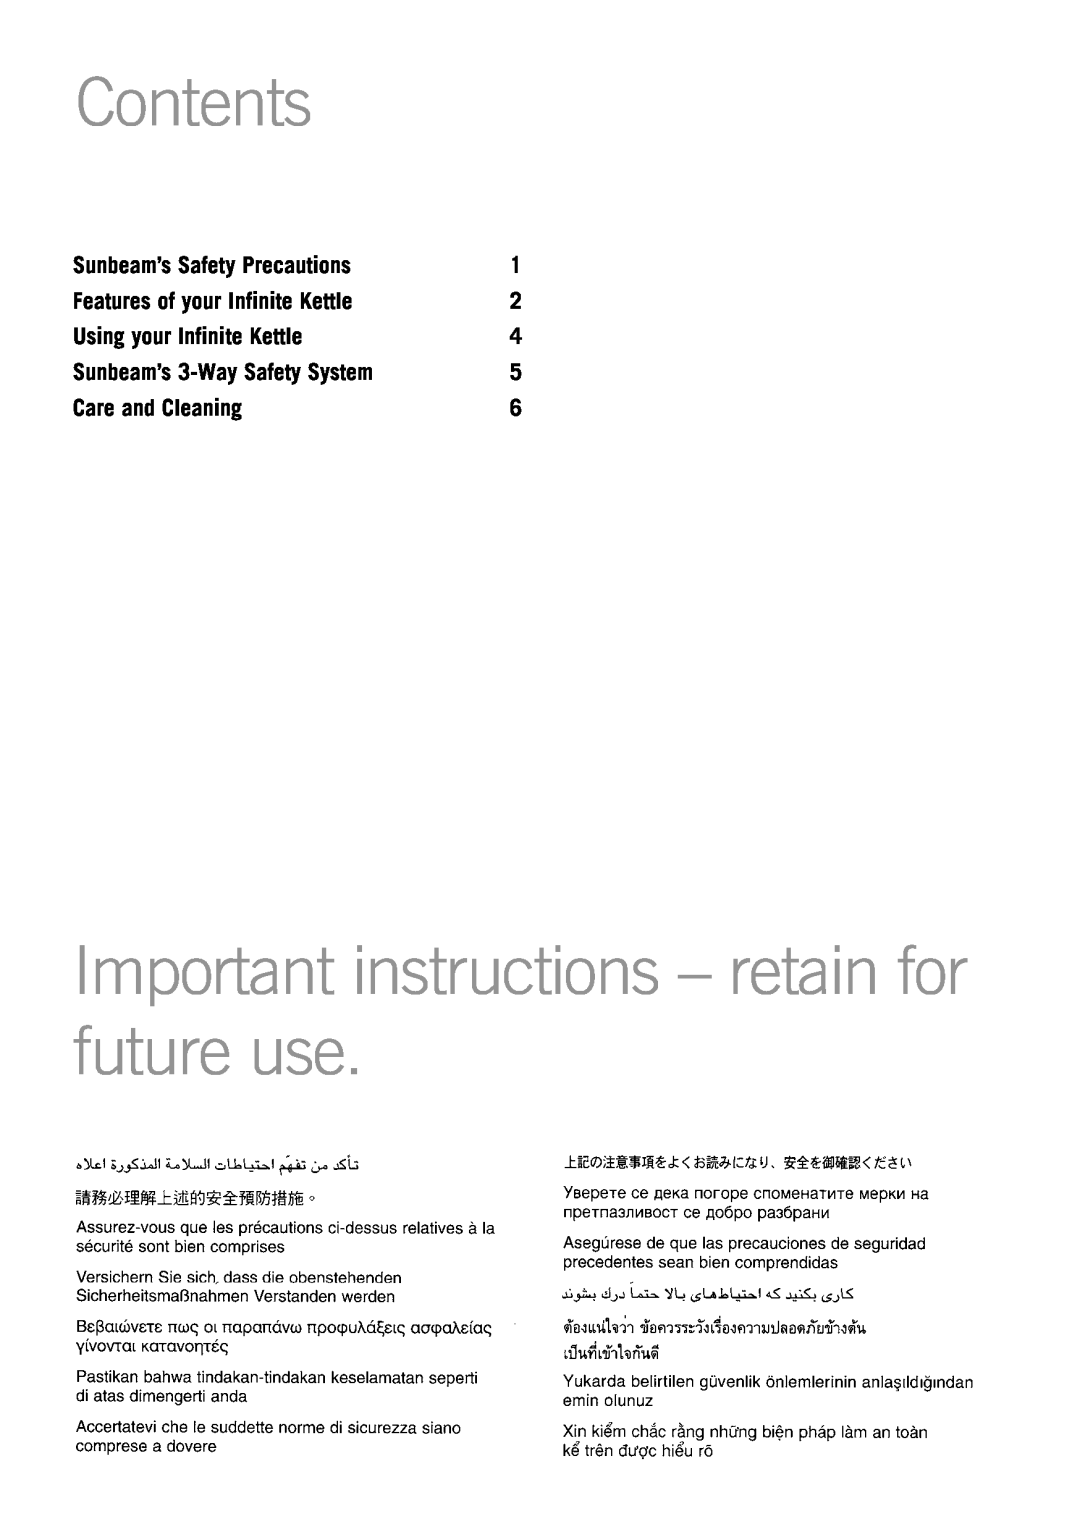 Sunbeam KE2200 Contents, Important instructions - retain for future use, Sunbeam’s Safety Precautions, Care and Cleaning 